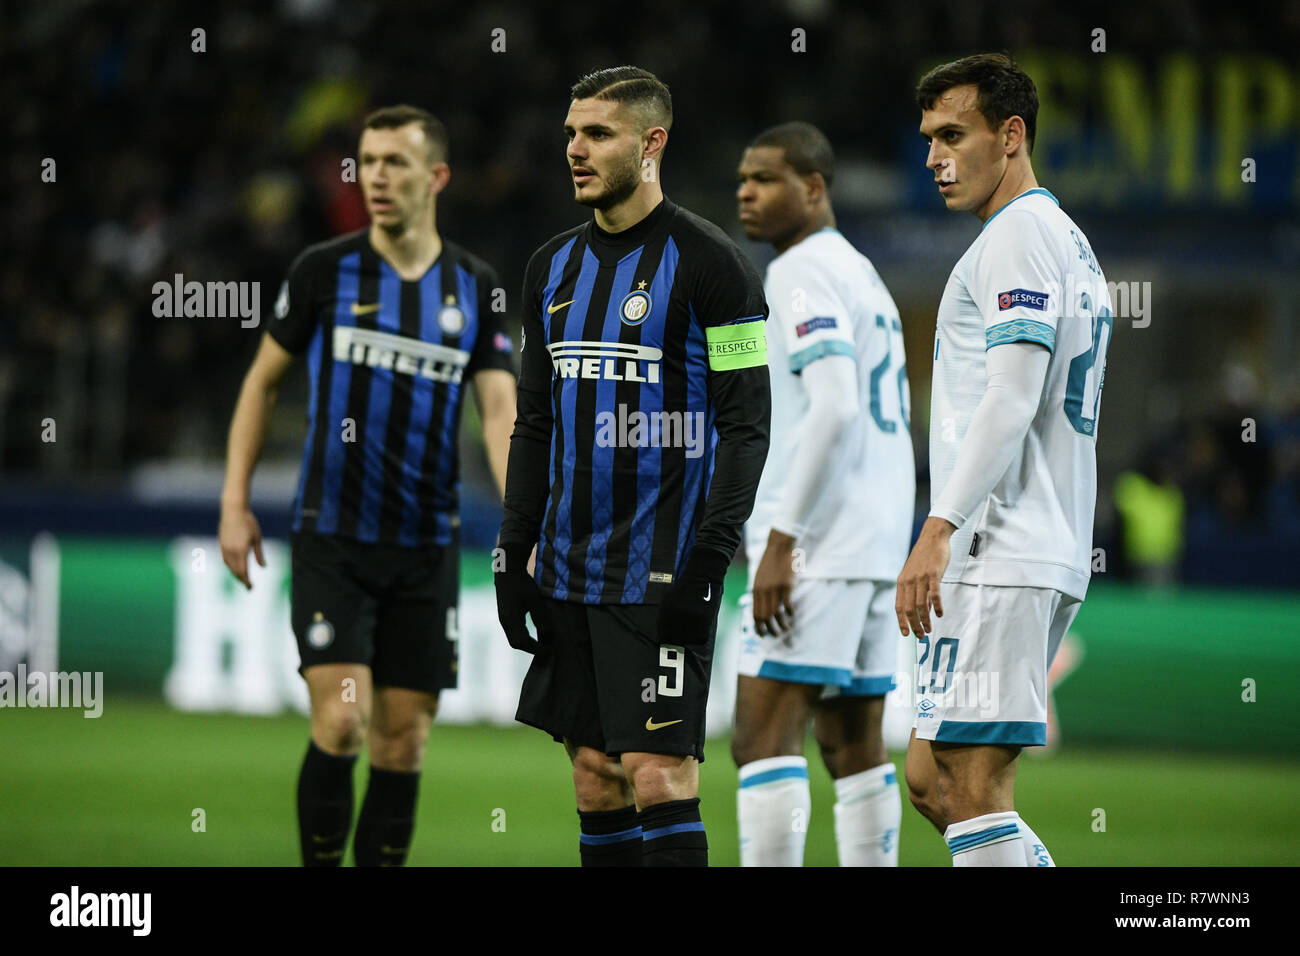 Milan, Italy. 11th December, 2018. Midfielder Ivan Perisic (Inter), Forward Mauro Icardi (Inter), Defender Denzel Dumfries(PSV Eindhoven) and Defender Trent Sainsbury(PSV Eindhoven) during the UEFA Champions League football match, Inter Milan vs PSV Eindhoven at San Siro Meazza Stadium in Milan, Italy on 11 December 2018 Credit: Piero Cruciatti/Alamy Live News Stock Photo